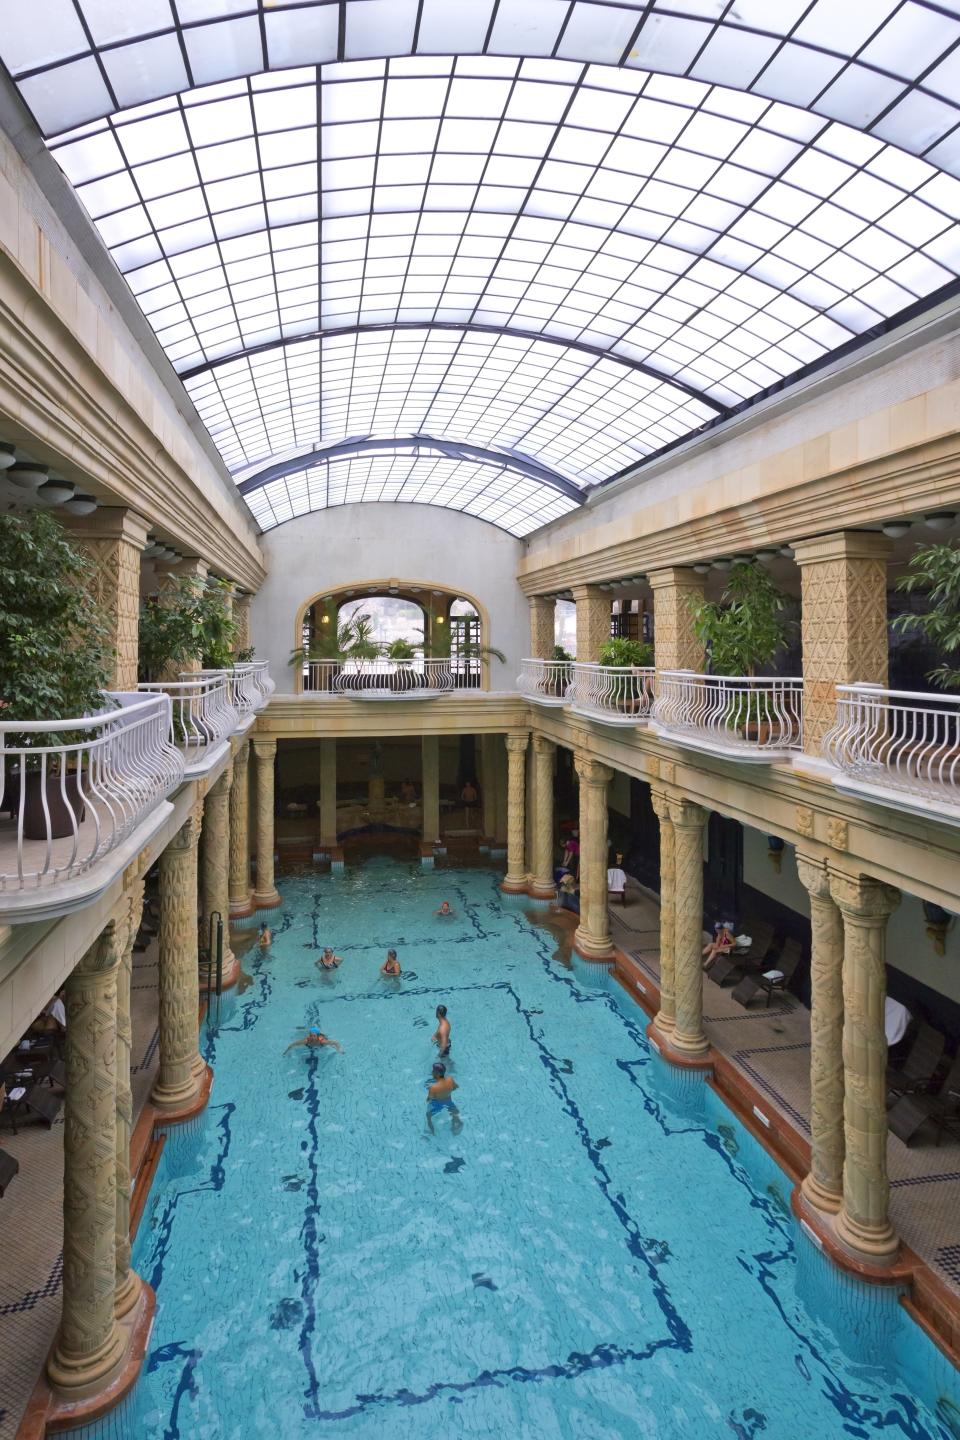 The <strong>Gellert Baths</strong>, in Budapest, Hungary, feature a 2,650-square-foot indoor swimming pool. Since 1918 the waters at the Gellert Baths have been been a destination throughout the winter months.